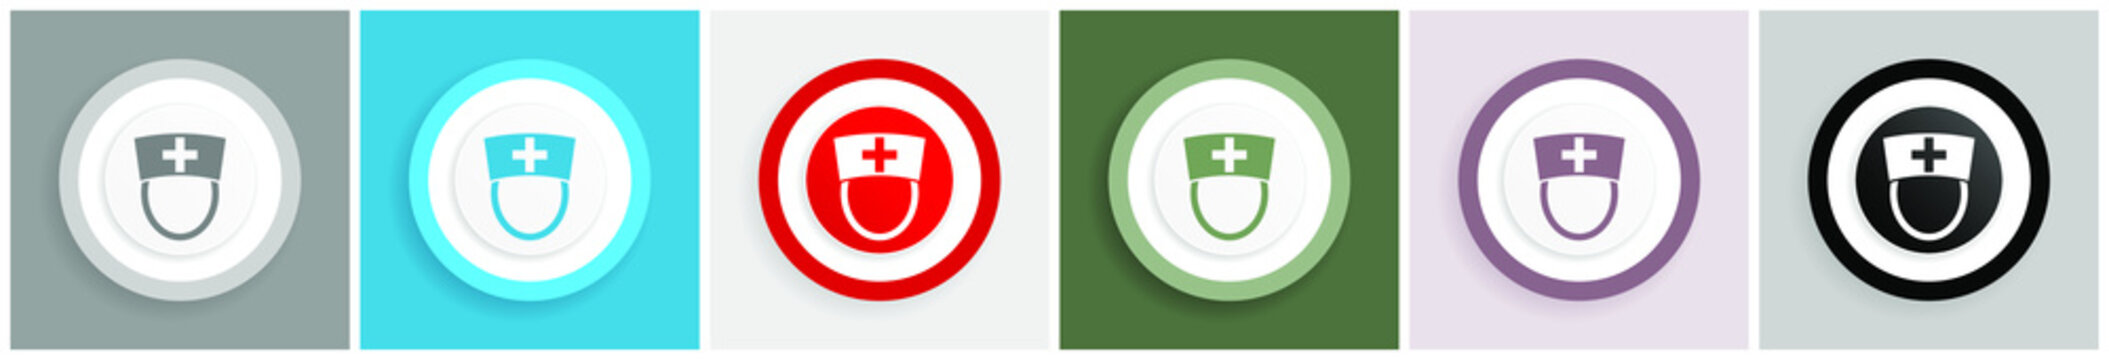 Nurse icon set, colorful flat design vector illustrations in 6 options for web design and mobile applications